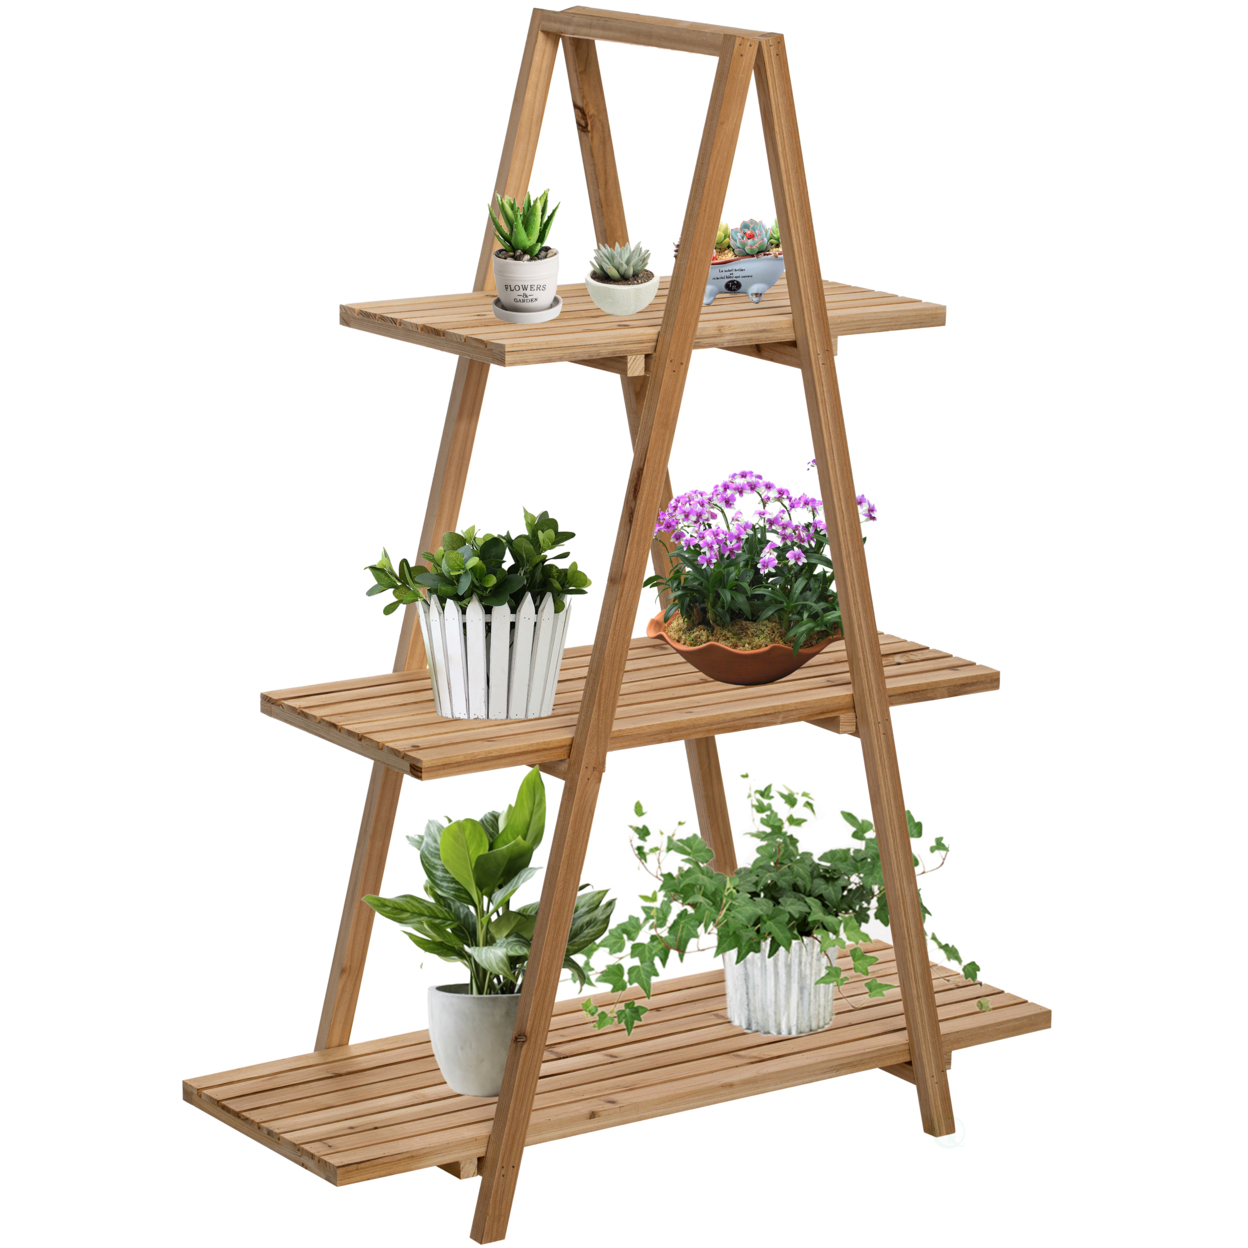 Decorative Wooden 3 Tier Shelf With Rustic Farmhouse Design - Natural Wood Finish, Sturdy And Durable Build, Space-Saving Organization